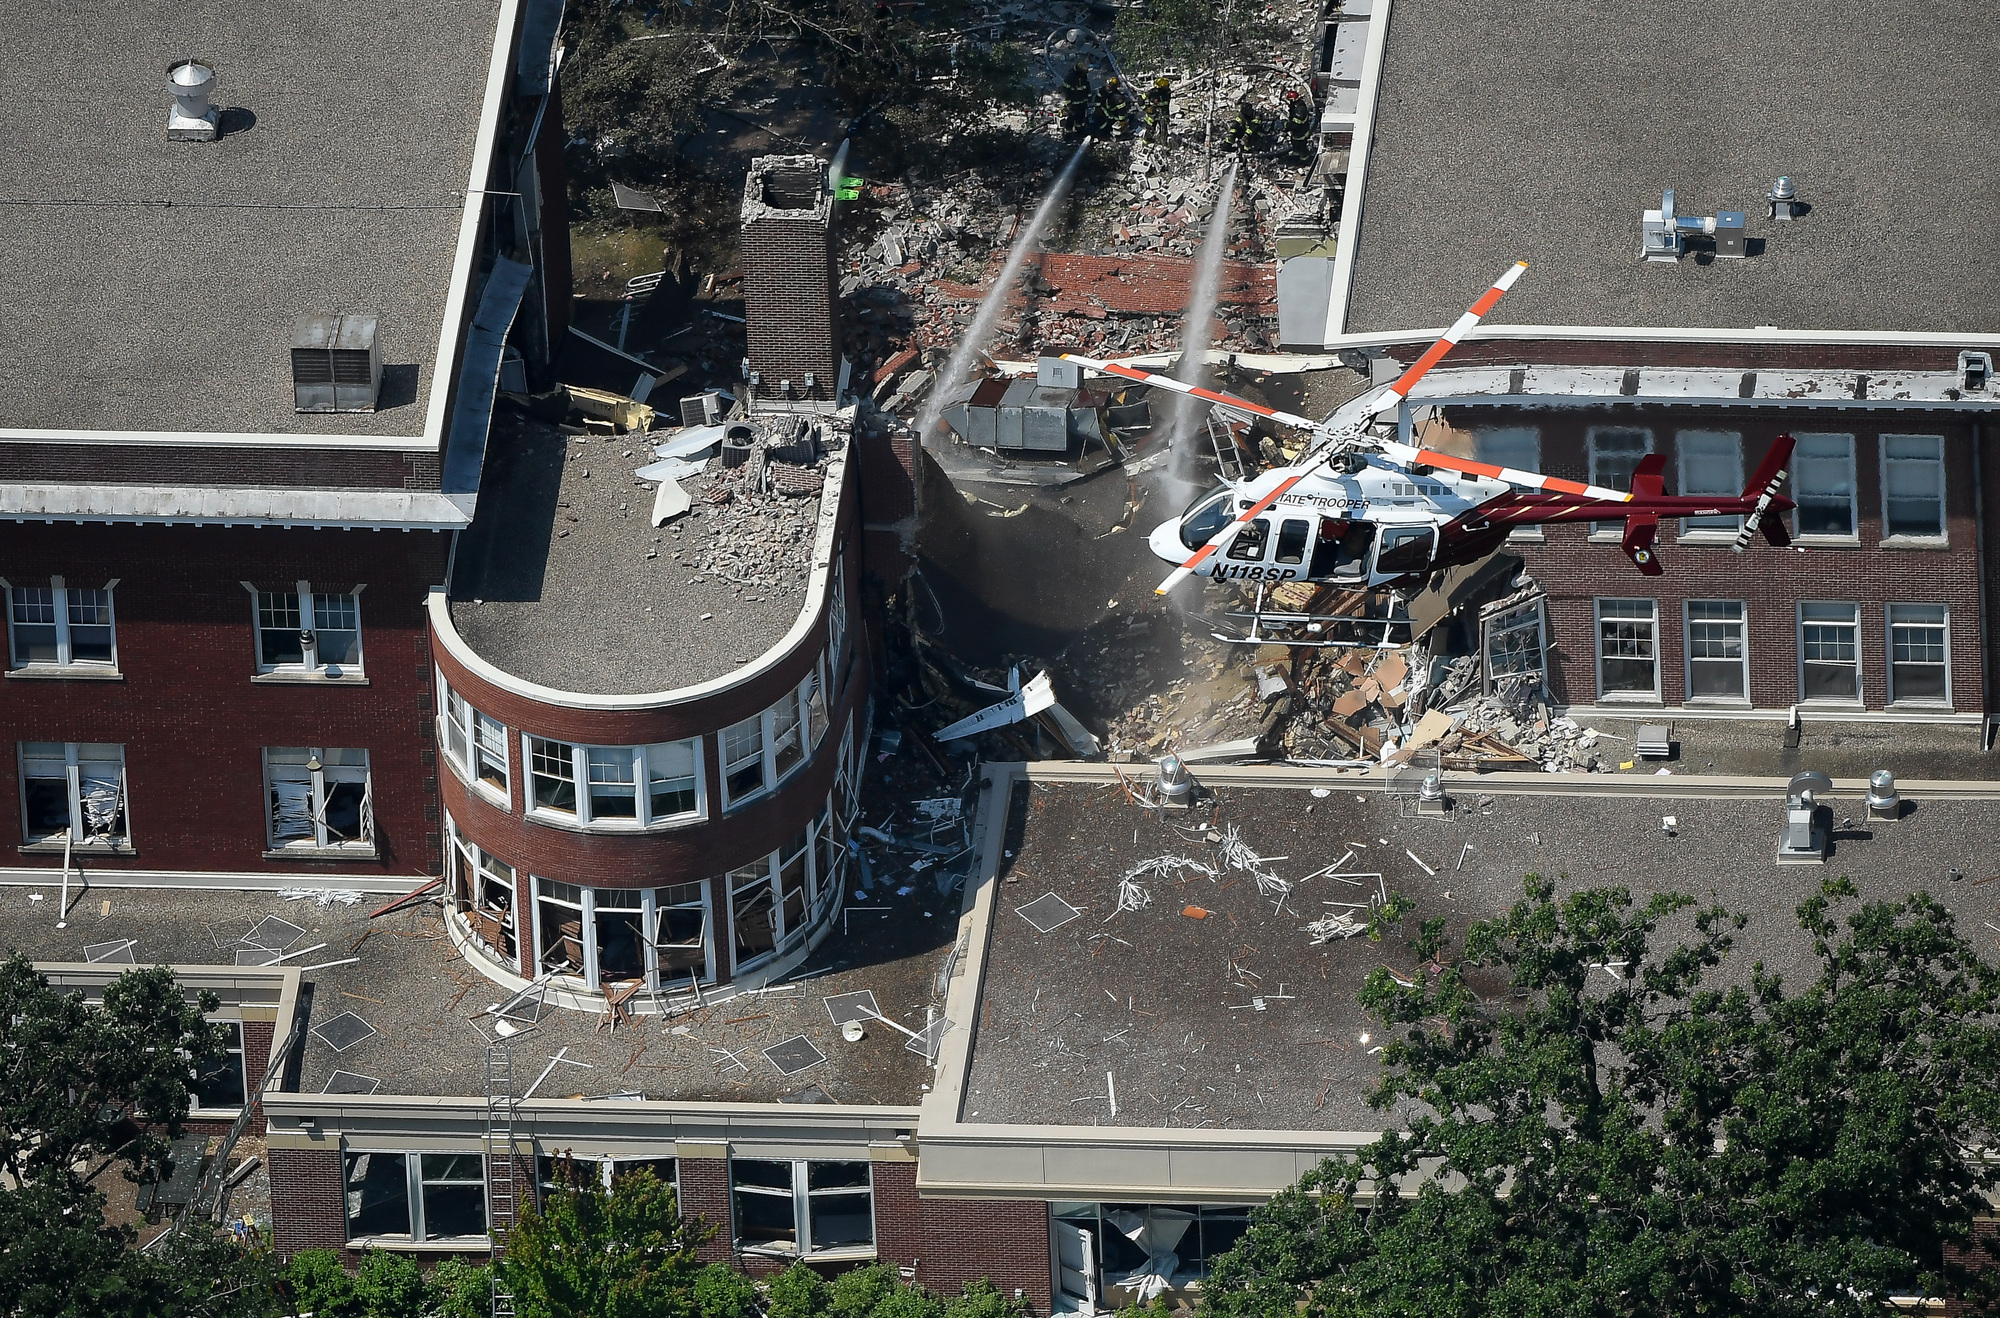 First responders tell what it was like to arrive on scene after a gas explosion at Minnehaha Academy.